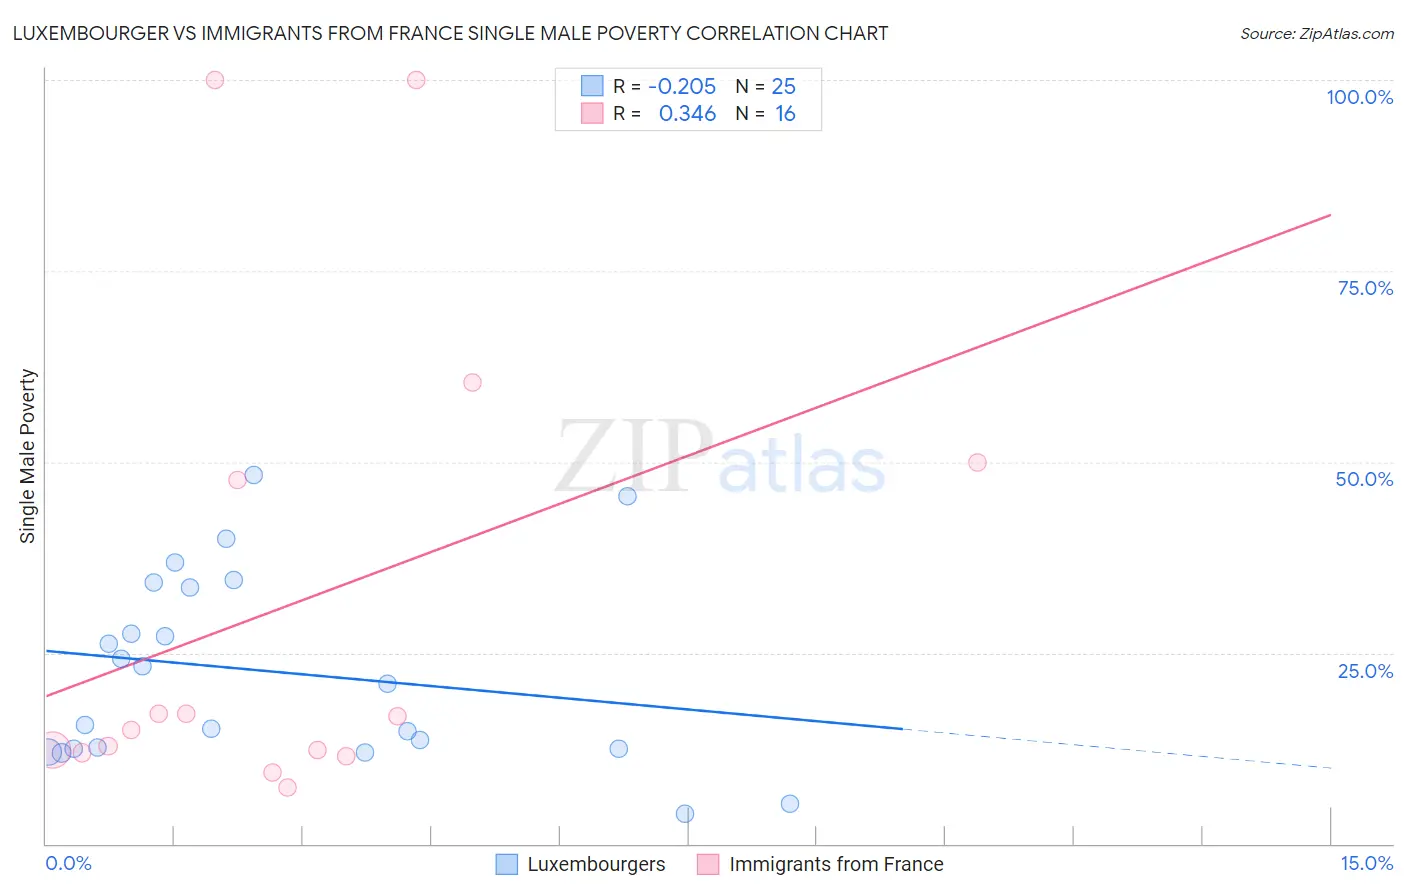 Luxembourger vs Immigrants from France Single Male Poverty